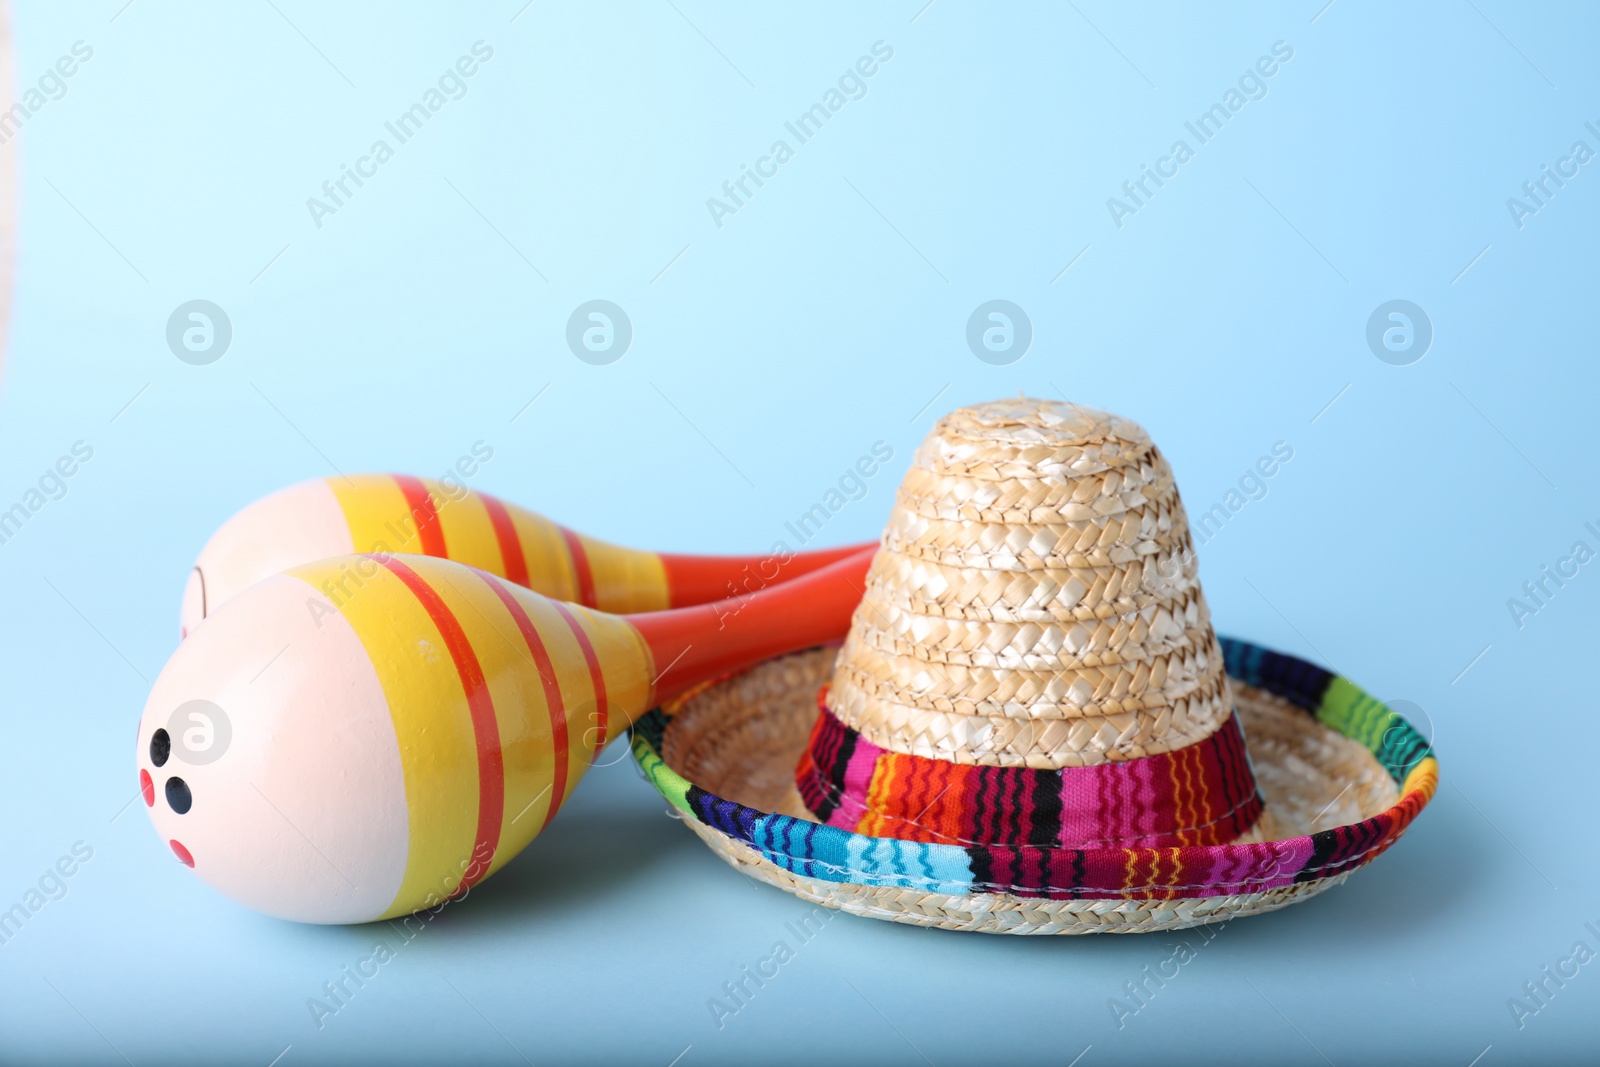 Photo of Colorful maracas and sombrero hat on light blue background. Musical instrument